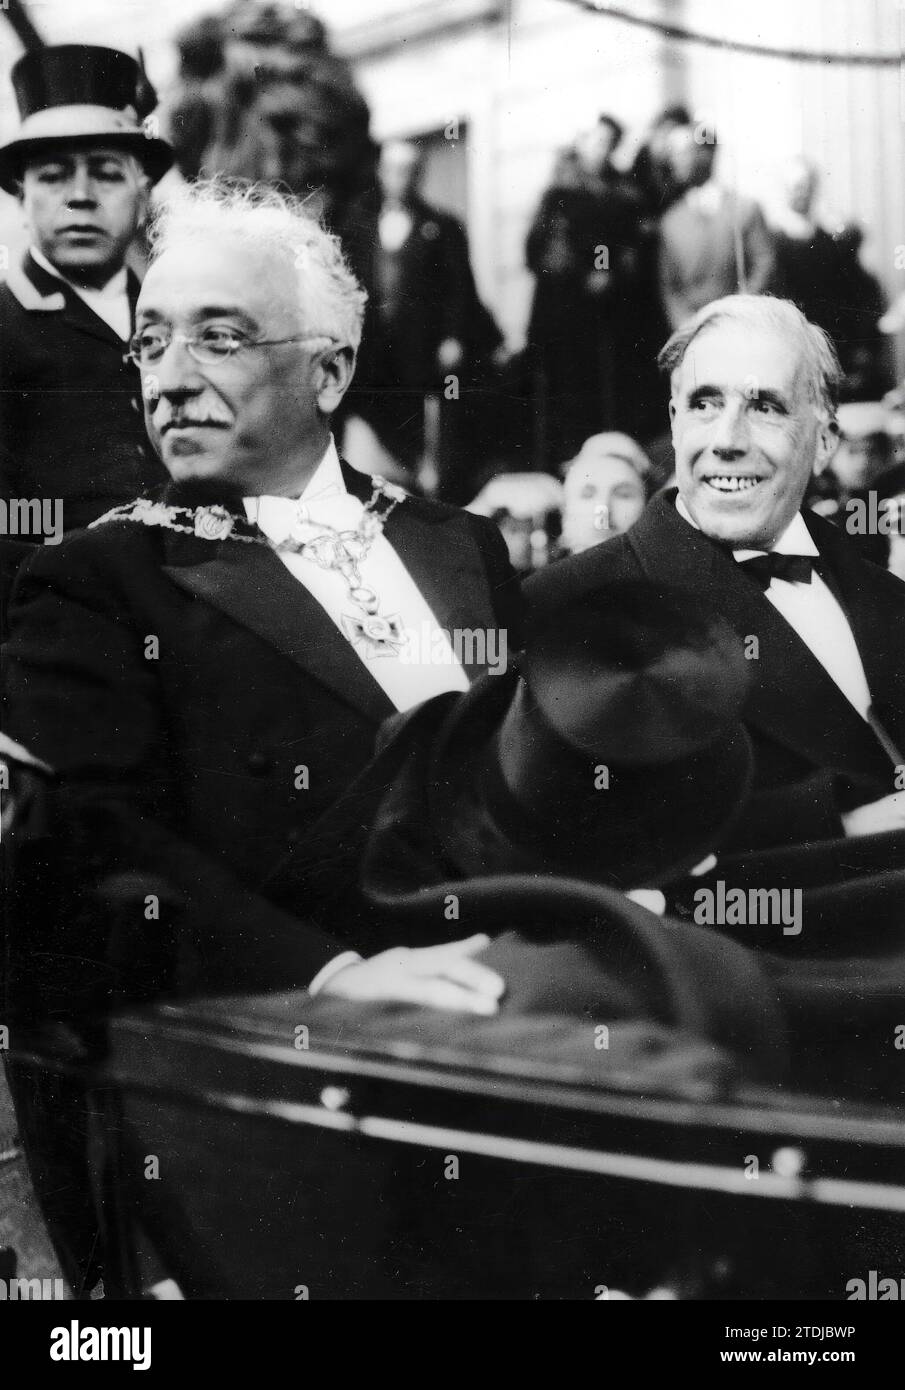 12/10/1931. Alcalá Zamora after being sworn in as President of the Republic, wears the necklace of Isabel la Católica imposed moments before. Next to him, Julián Besteiro. Photo: Diaz Casariego. Credit: Album / Archivo ABC / José Díaz Casariego Stock Photo